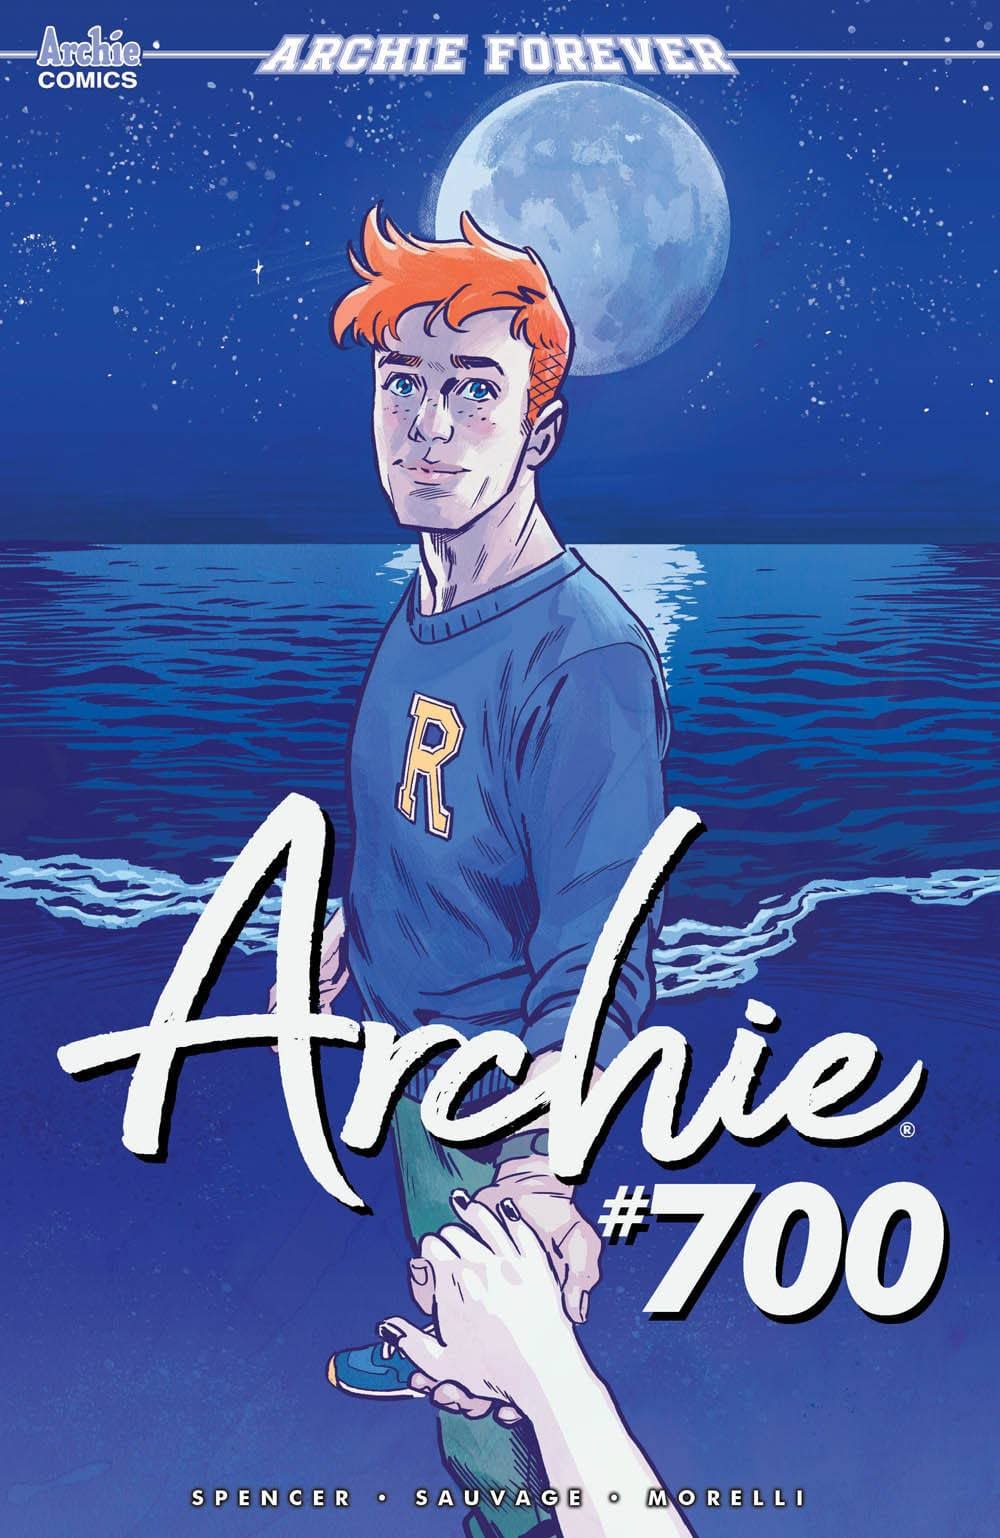 Archie #700 Preview Teases Secrets That Could "Change Everything" About Riverdale